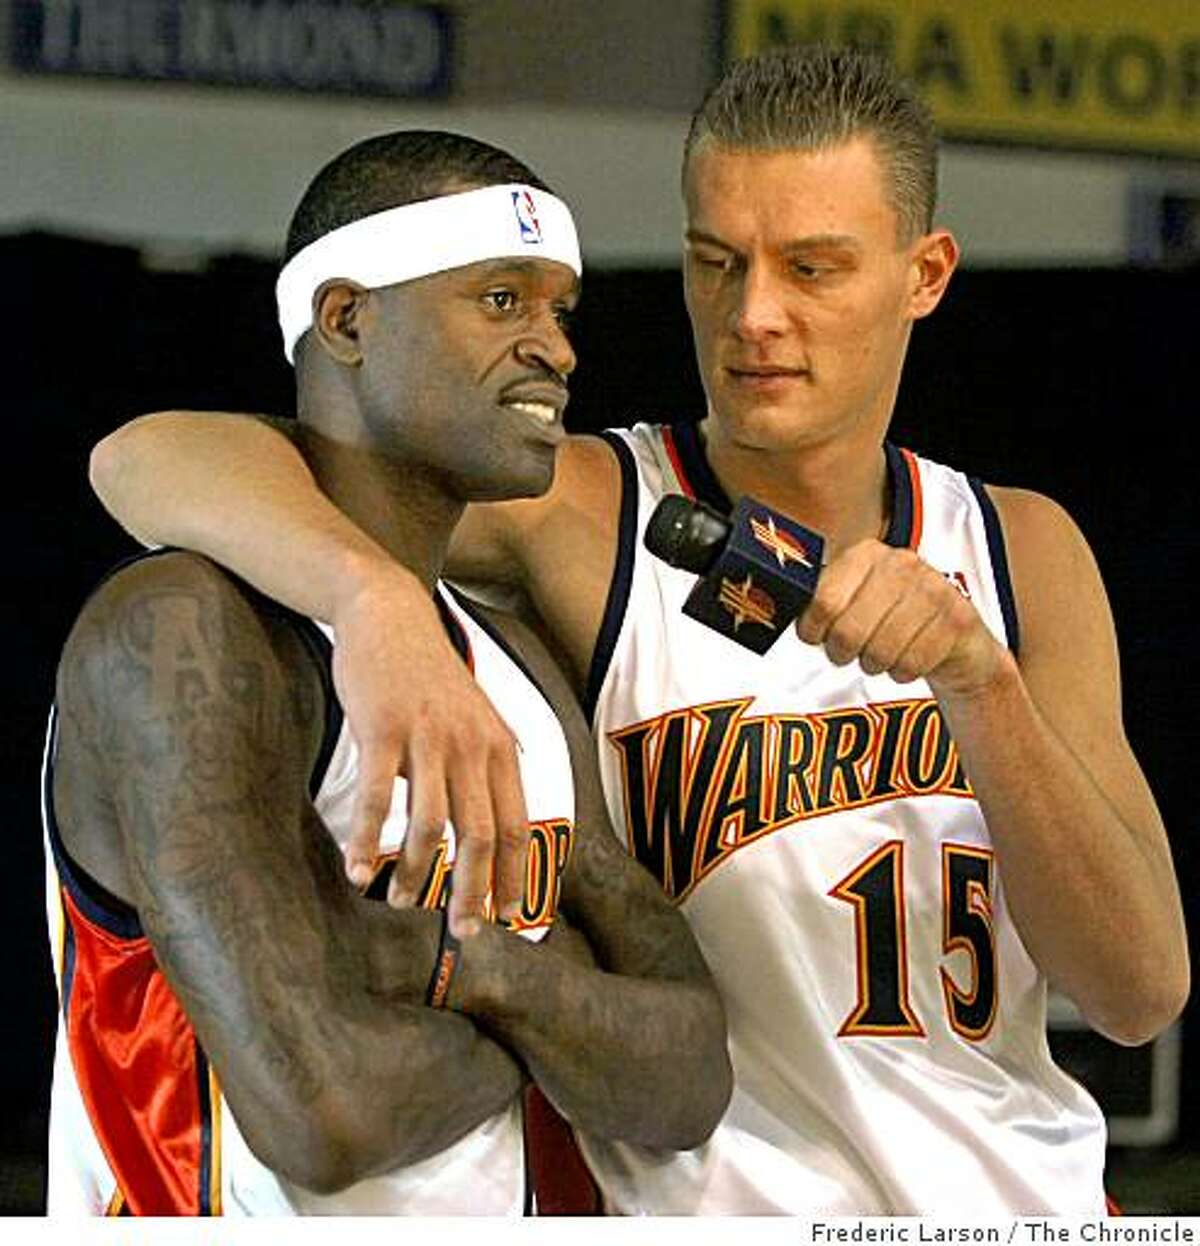 Warriors Stephen Jackson (left) and Andris Biedrins (15) interview each other during Media day at the Warriors headquarters in Oakland, Calif., on September 26, 2008.